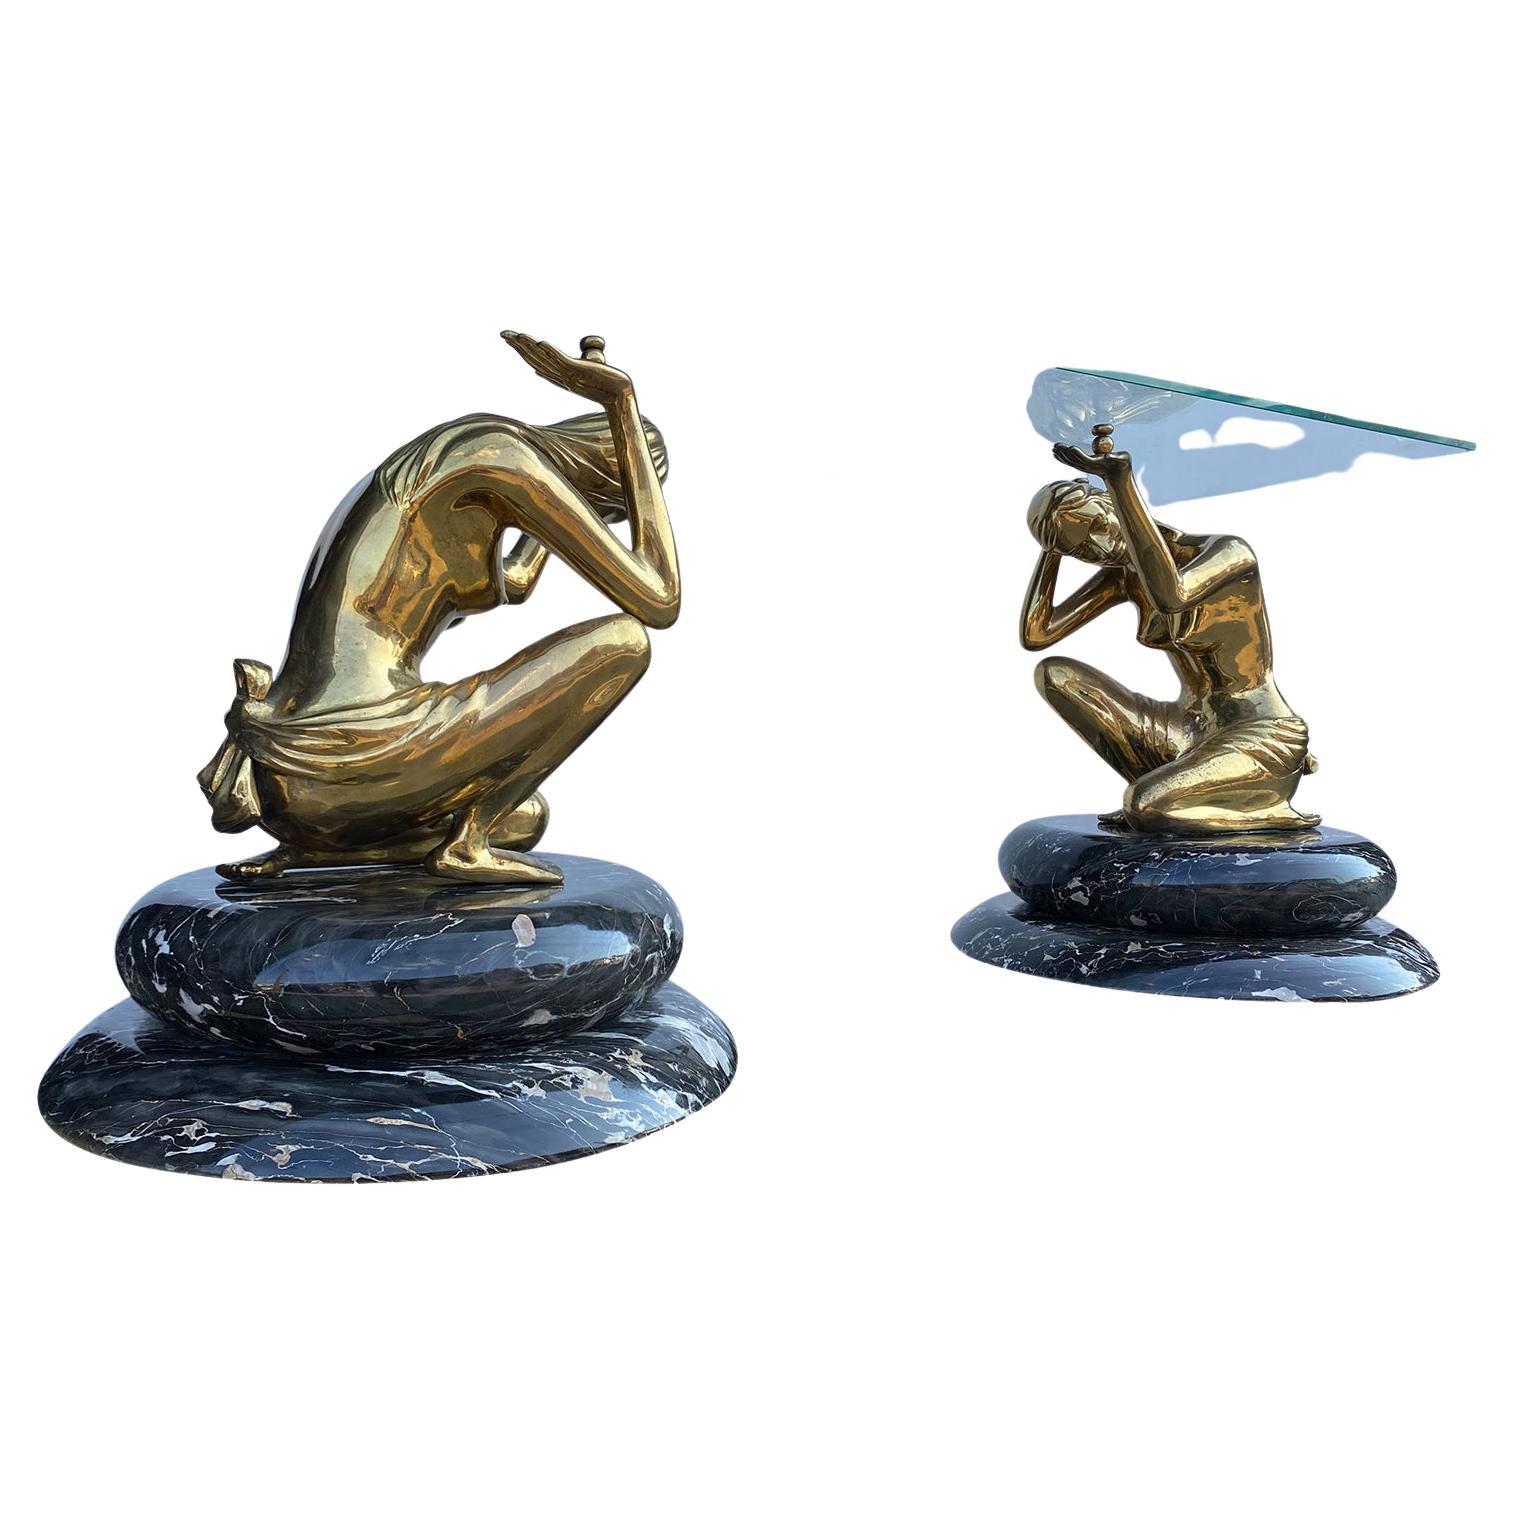 Beautiful museum quality Art Deco brass and marble sculpture of women table bases.Imported from Italy Exceptional craftsmanship & unbelievable detail.